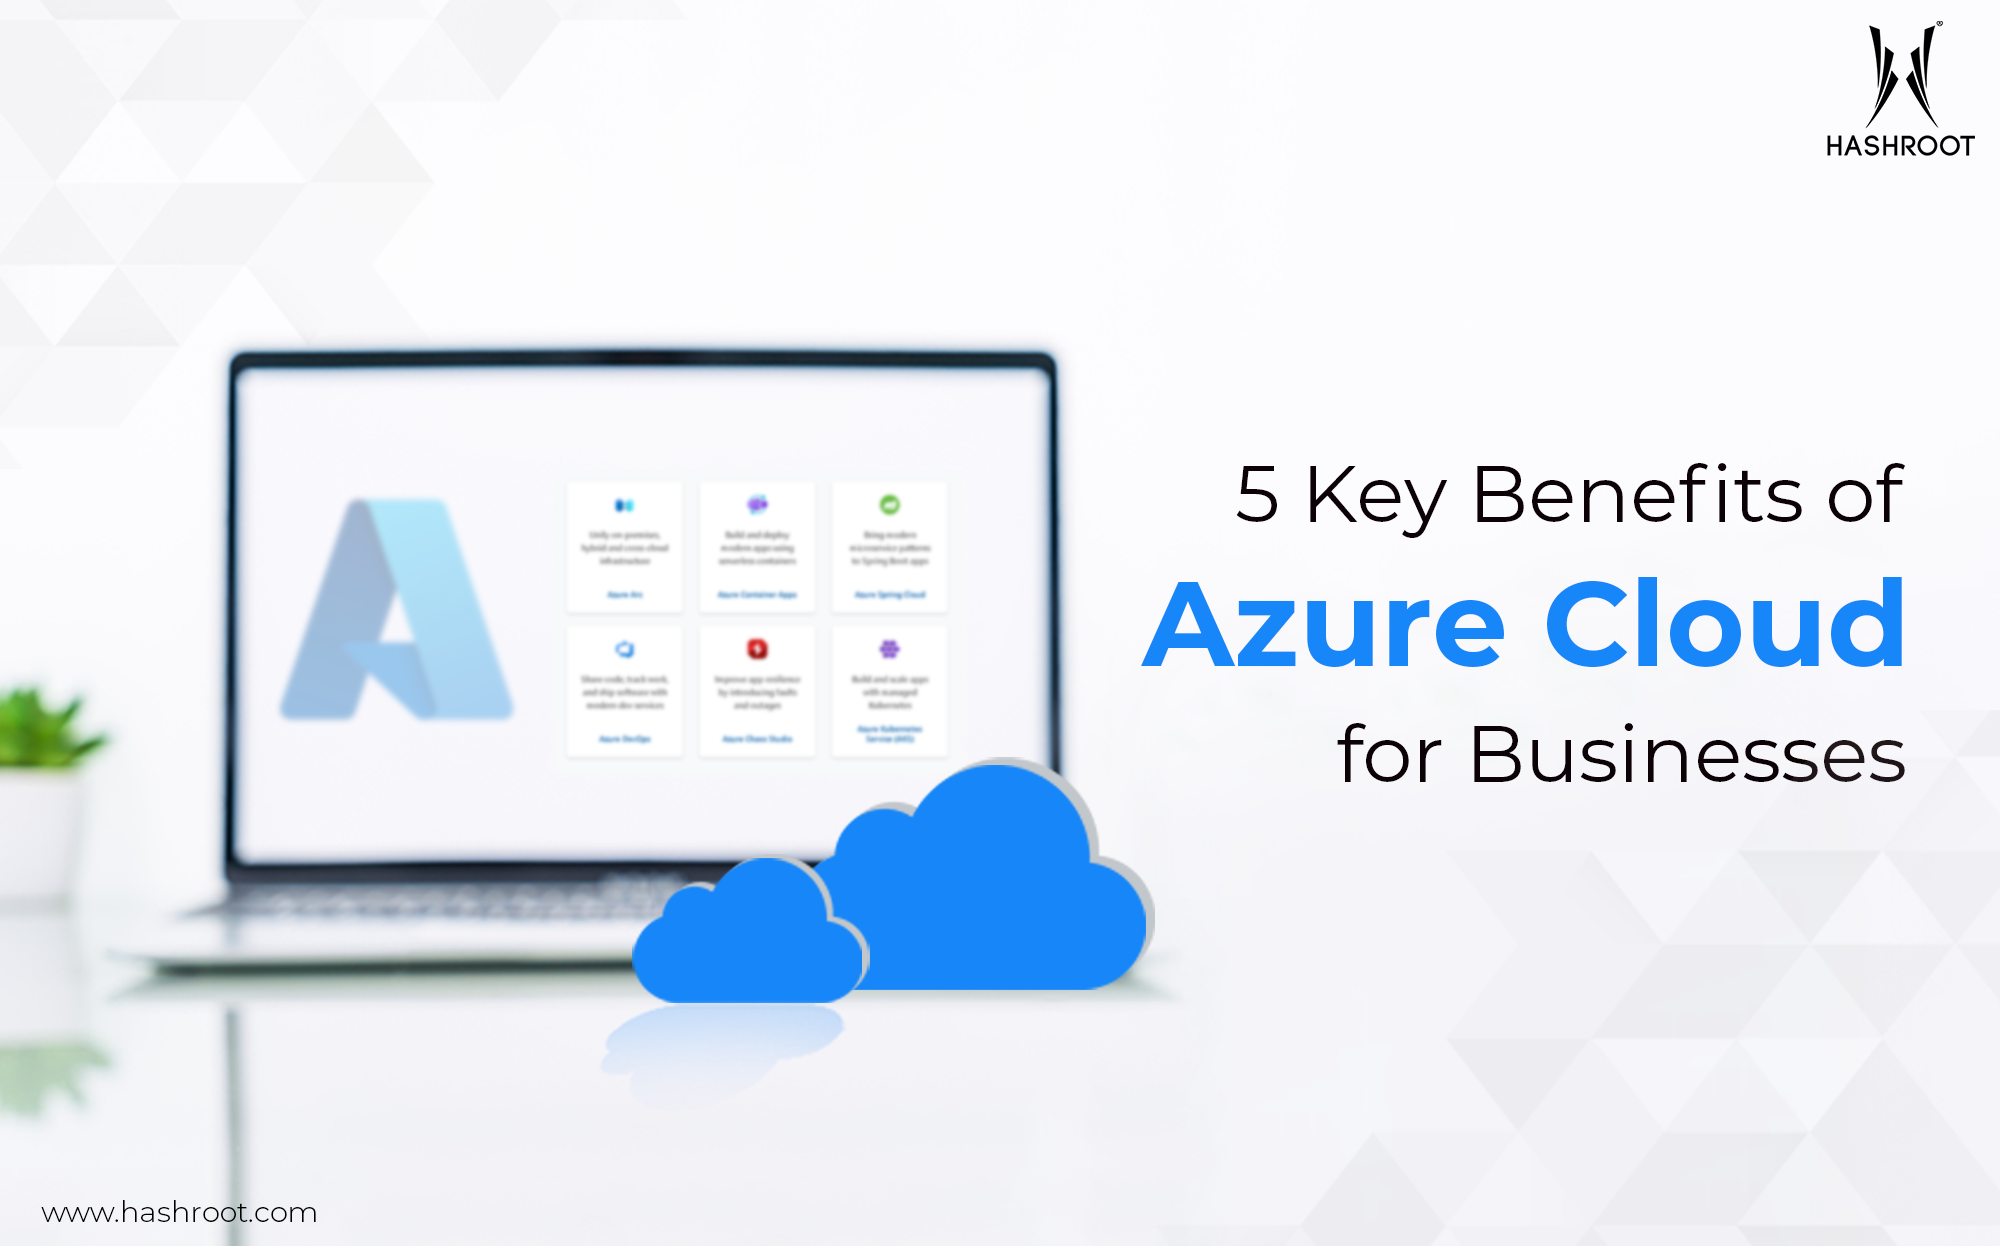 5 Key Benefits of Azure Cloud for Businesses